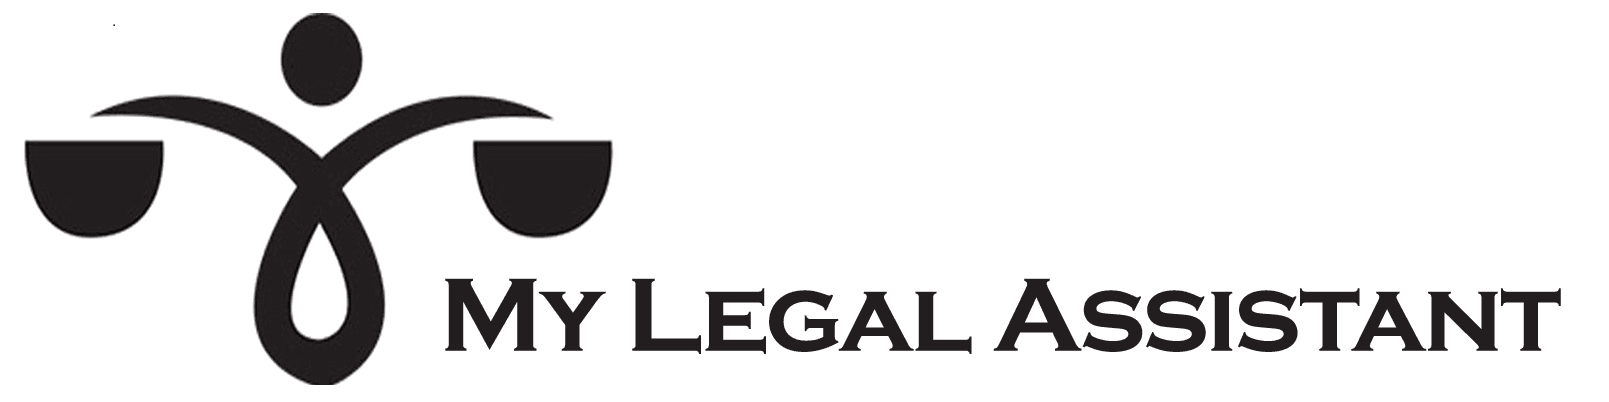 my legal assistant logo